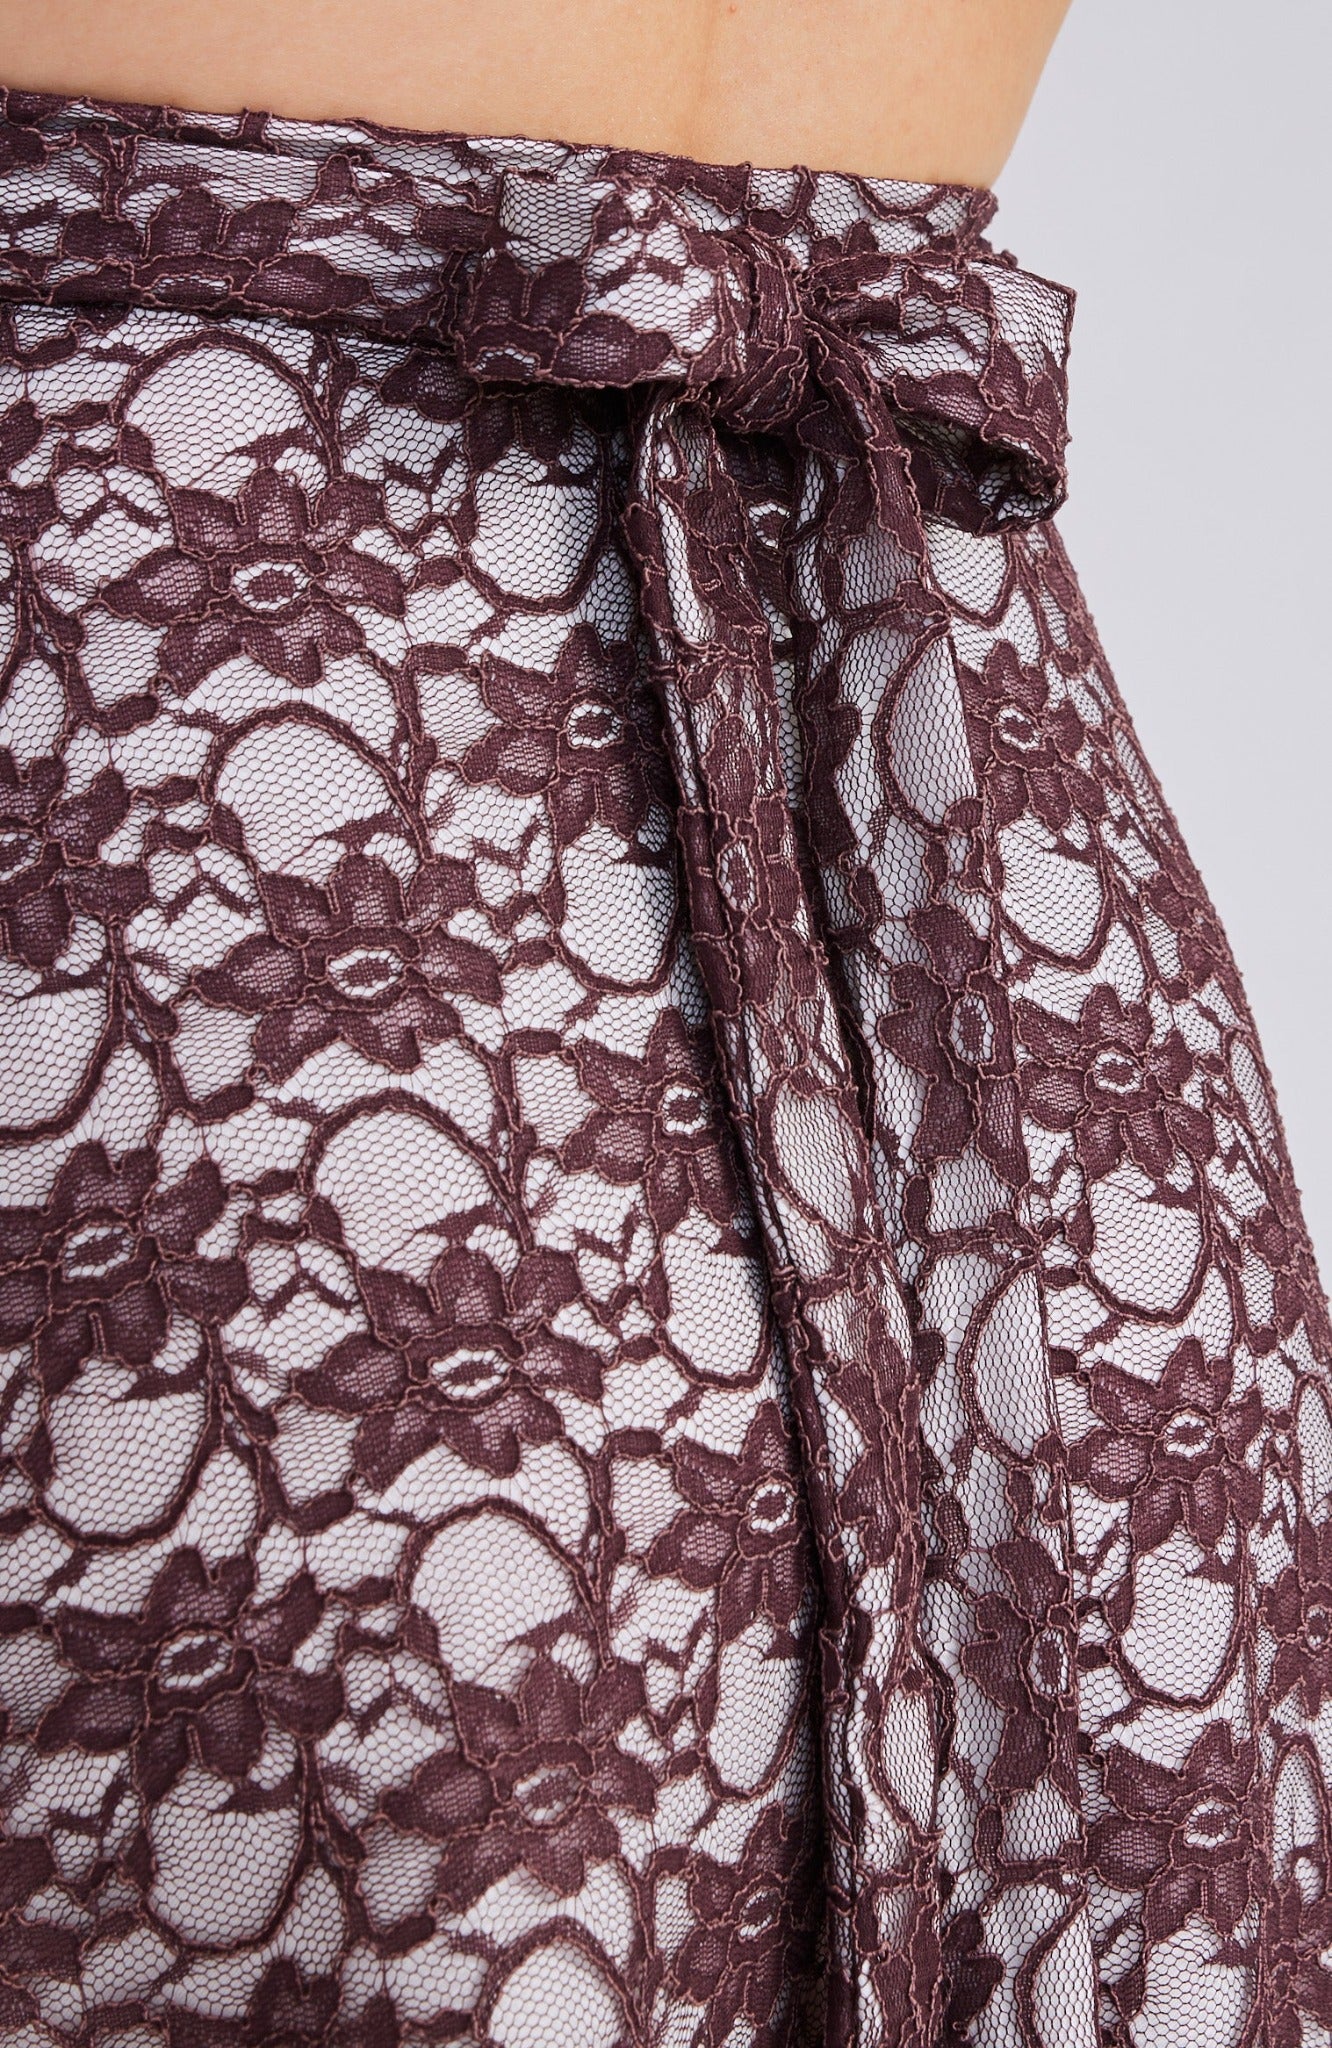 chocolate brown lace